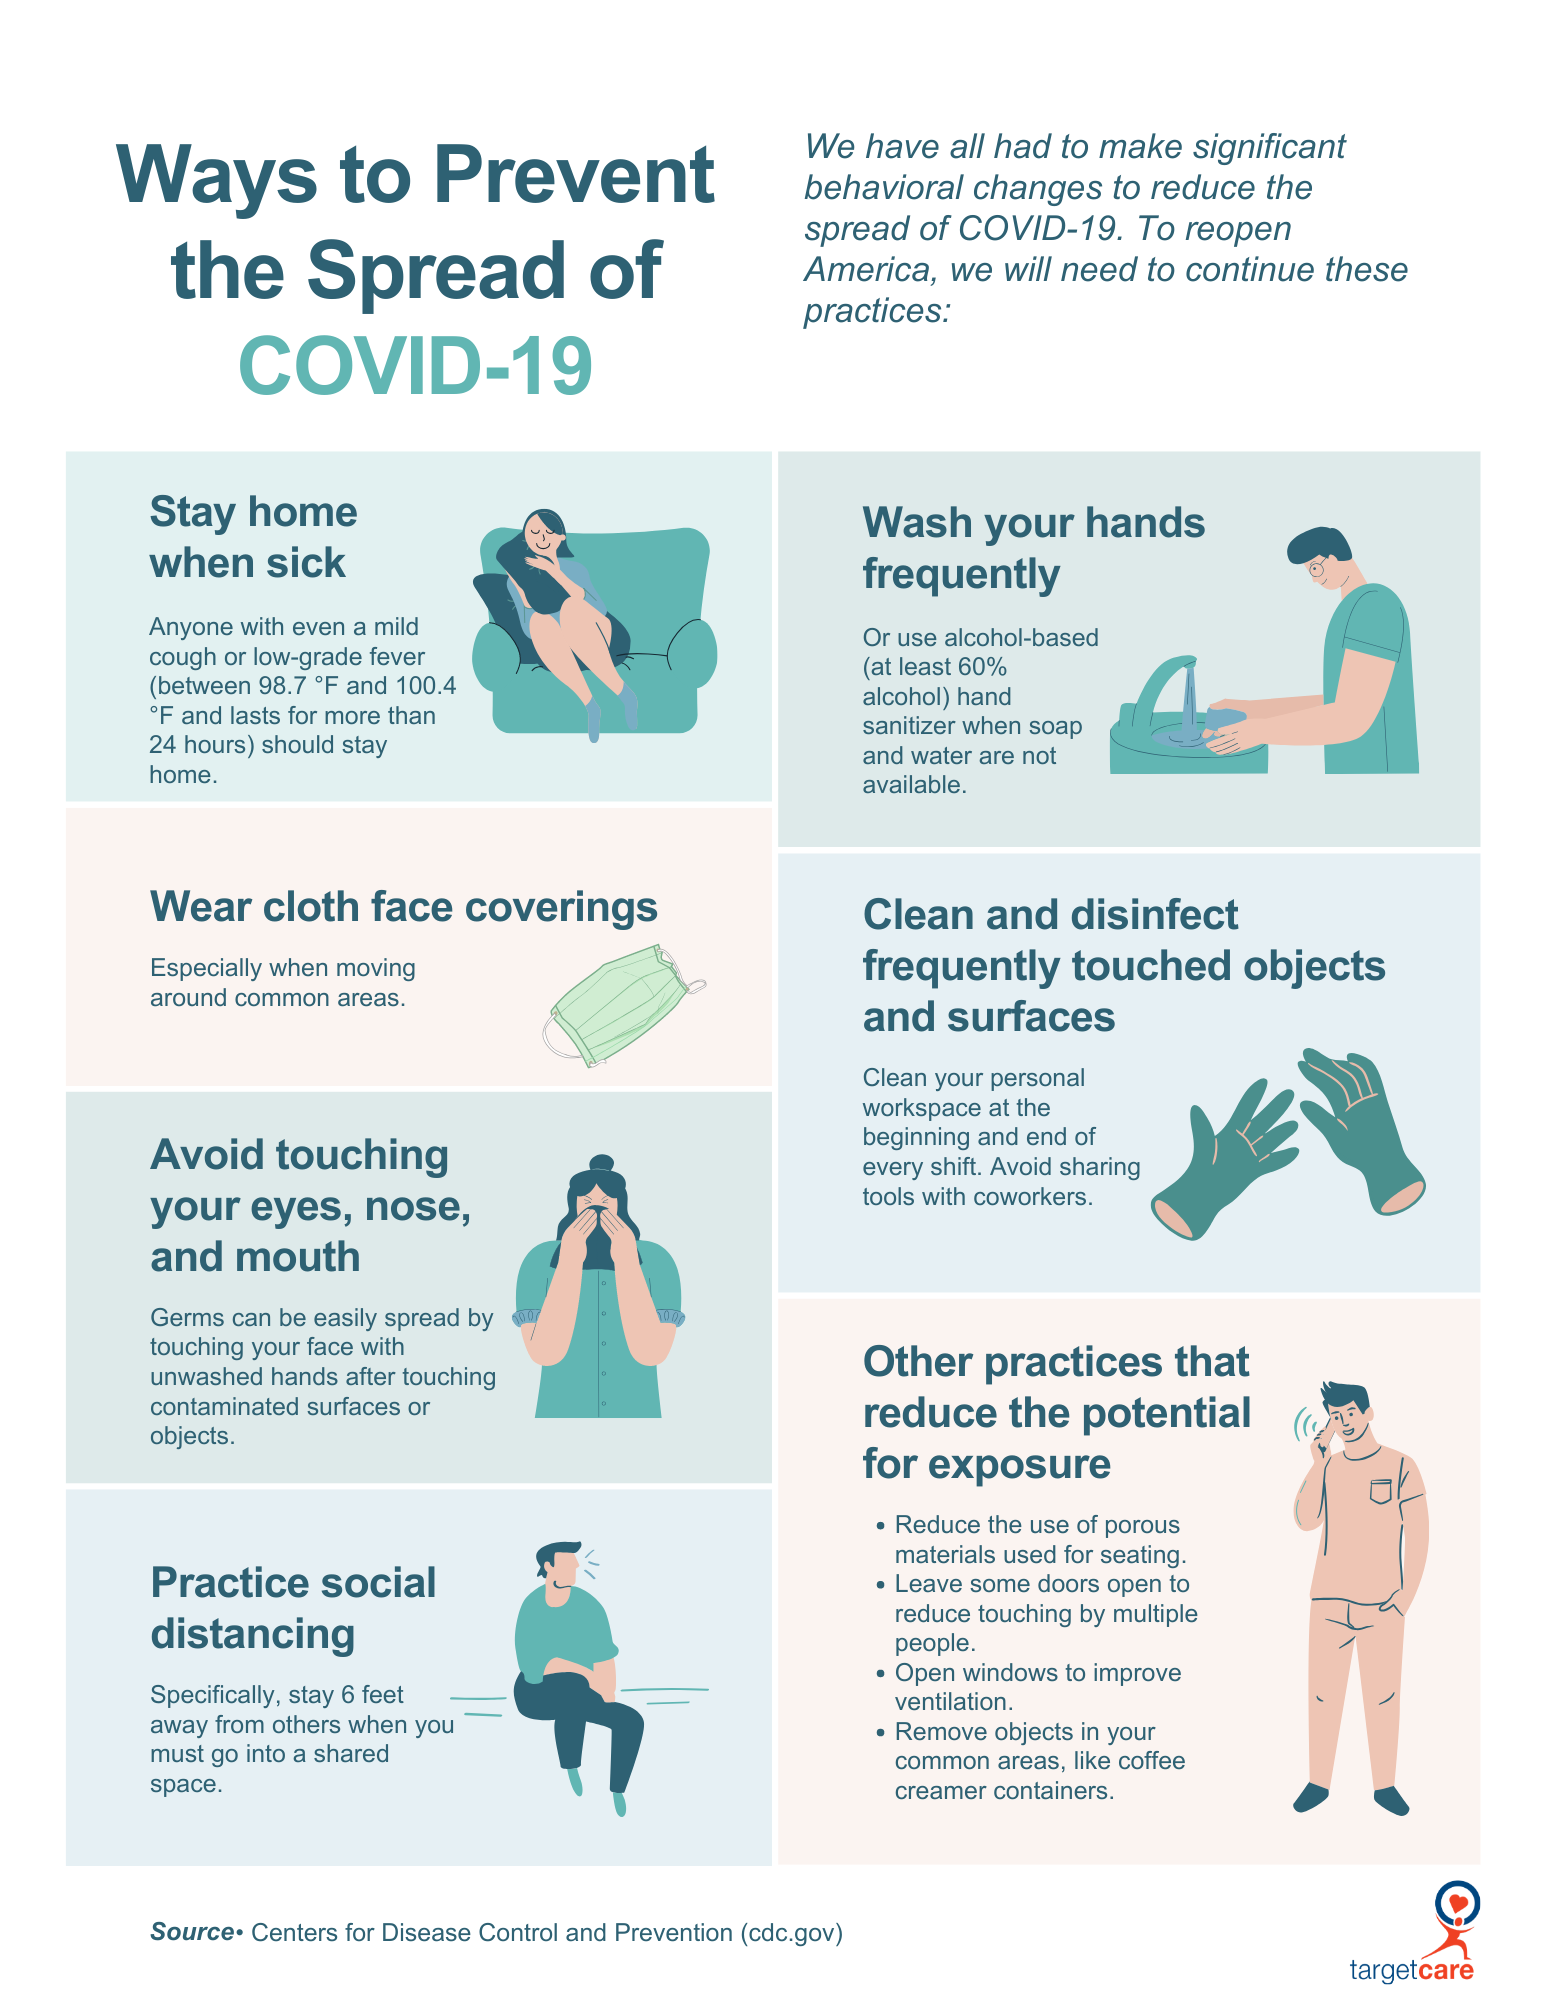 Ways to Prevent the Spread of COVID-19